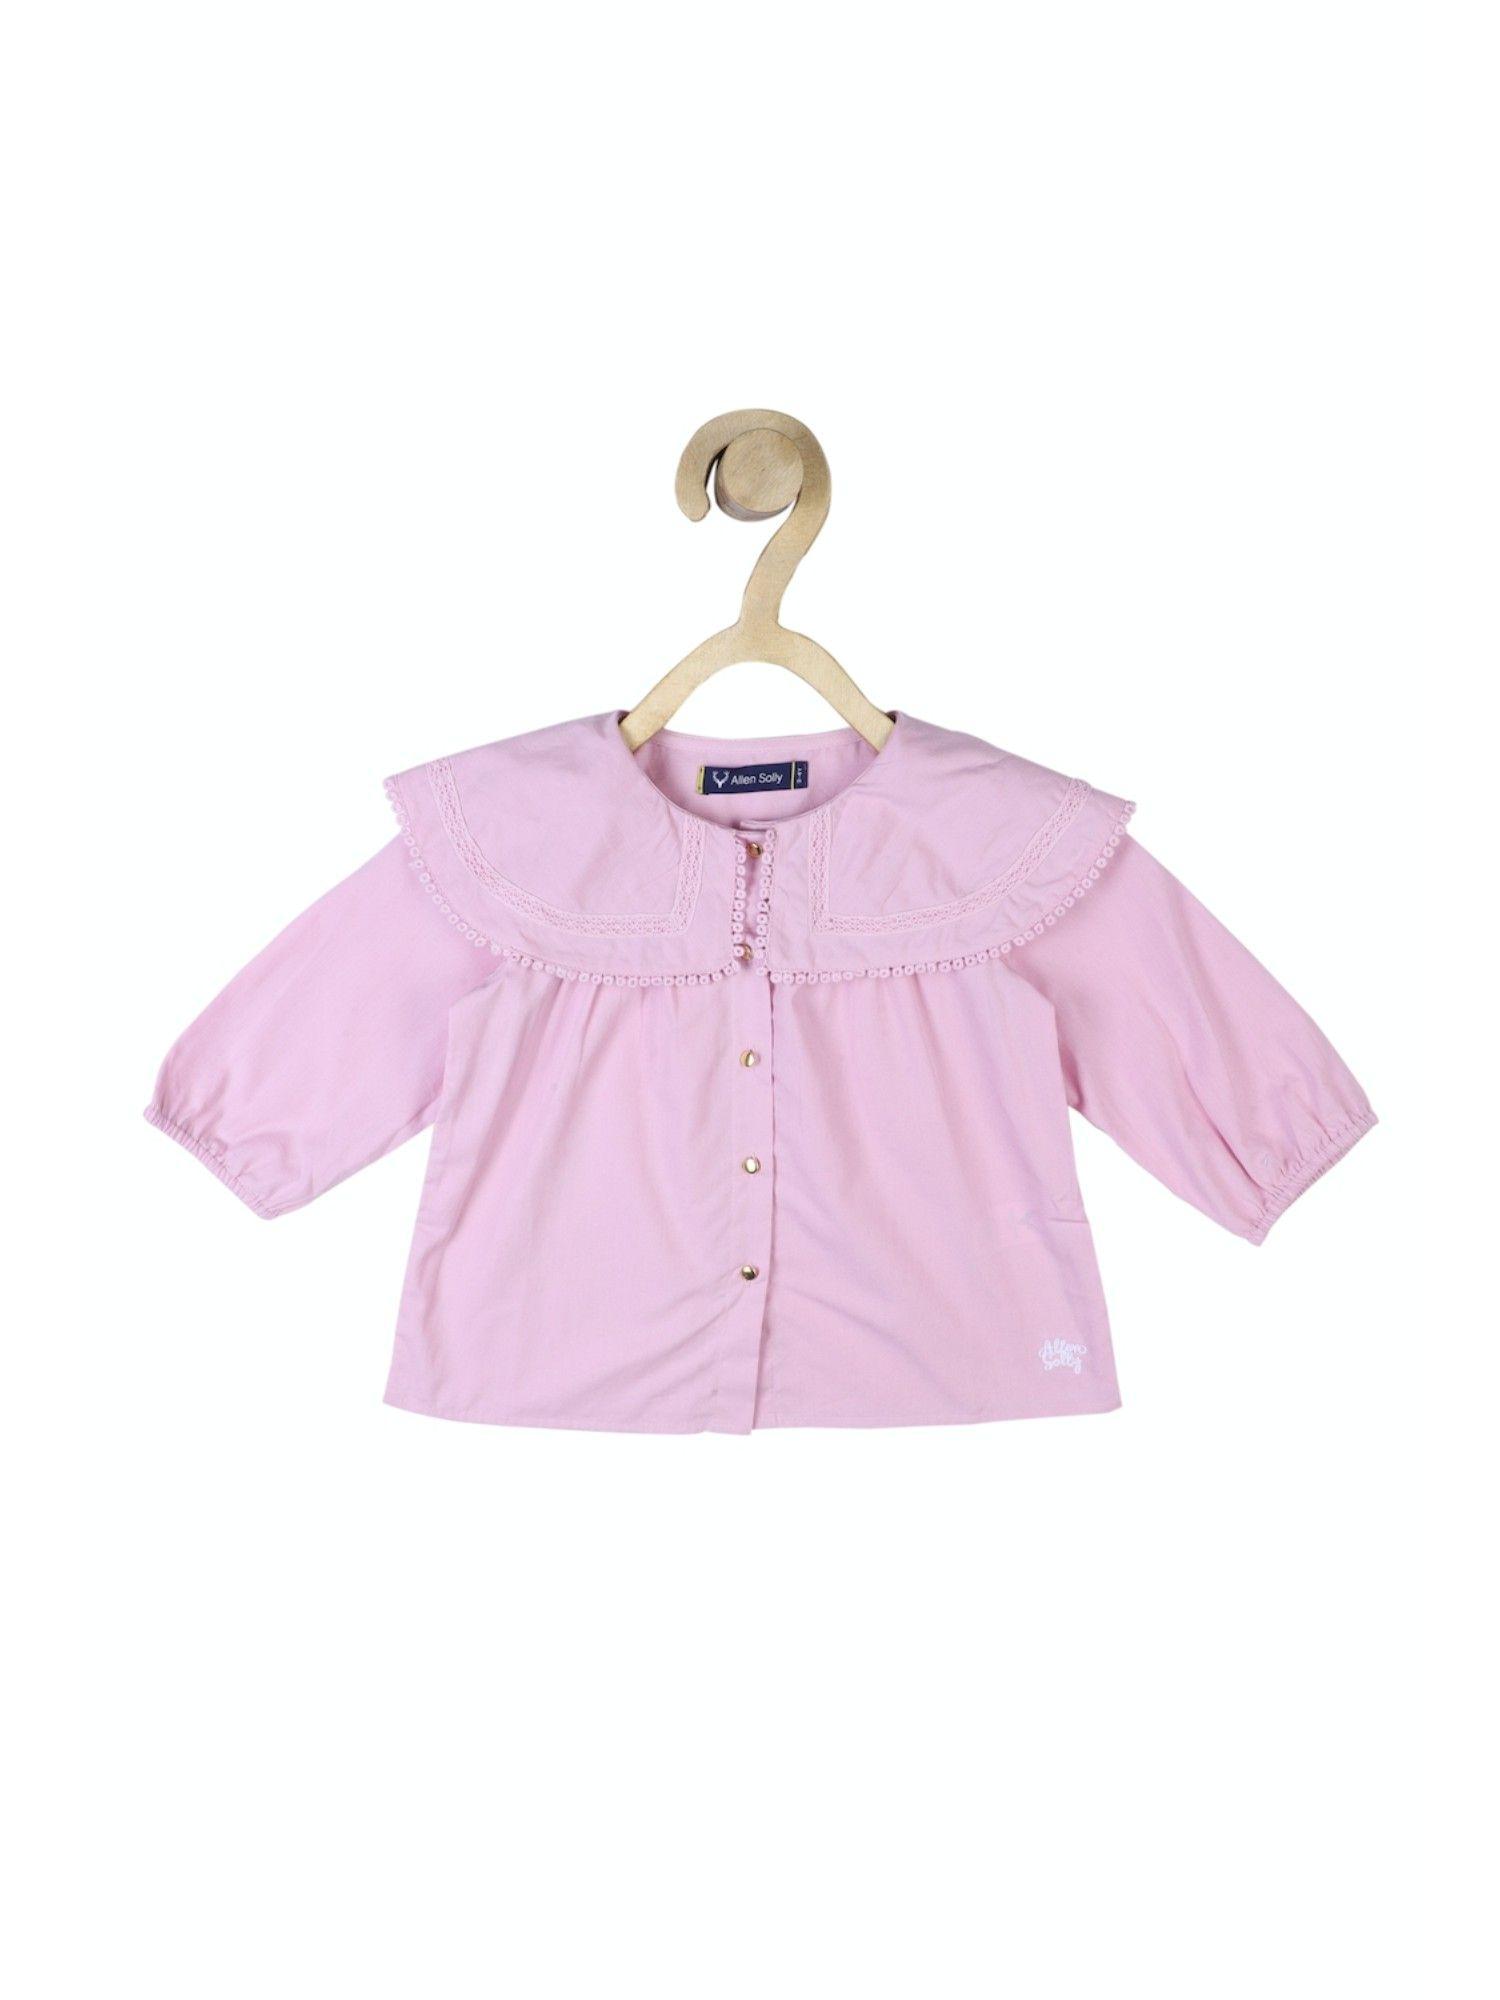 girls pink solid top